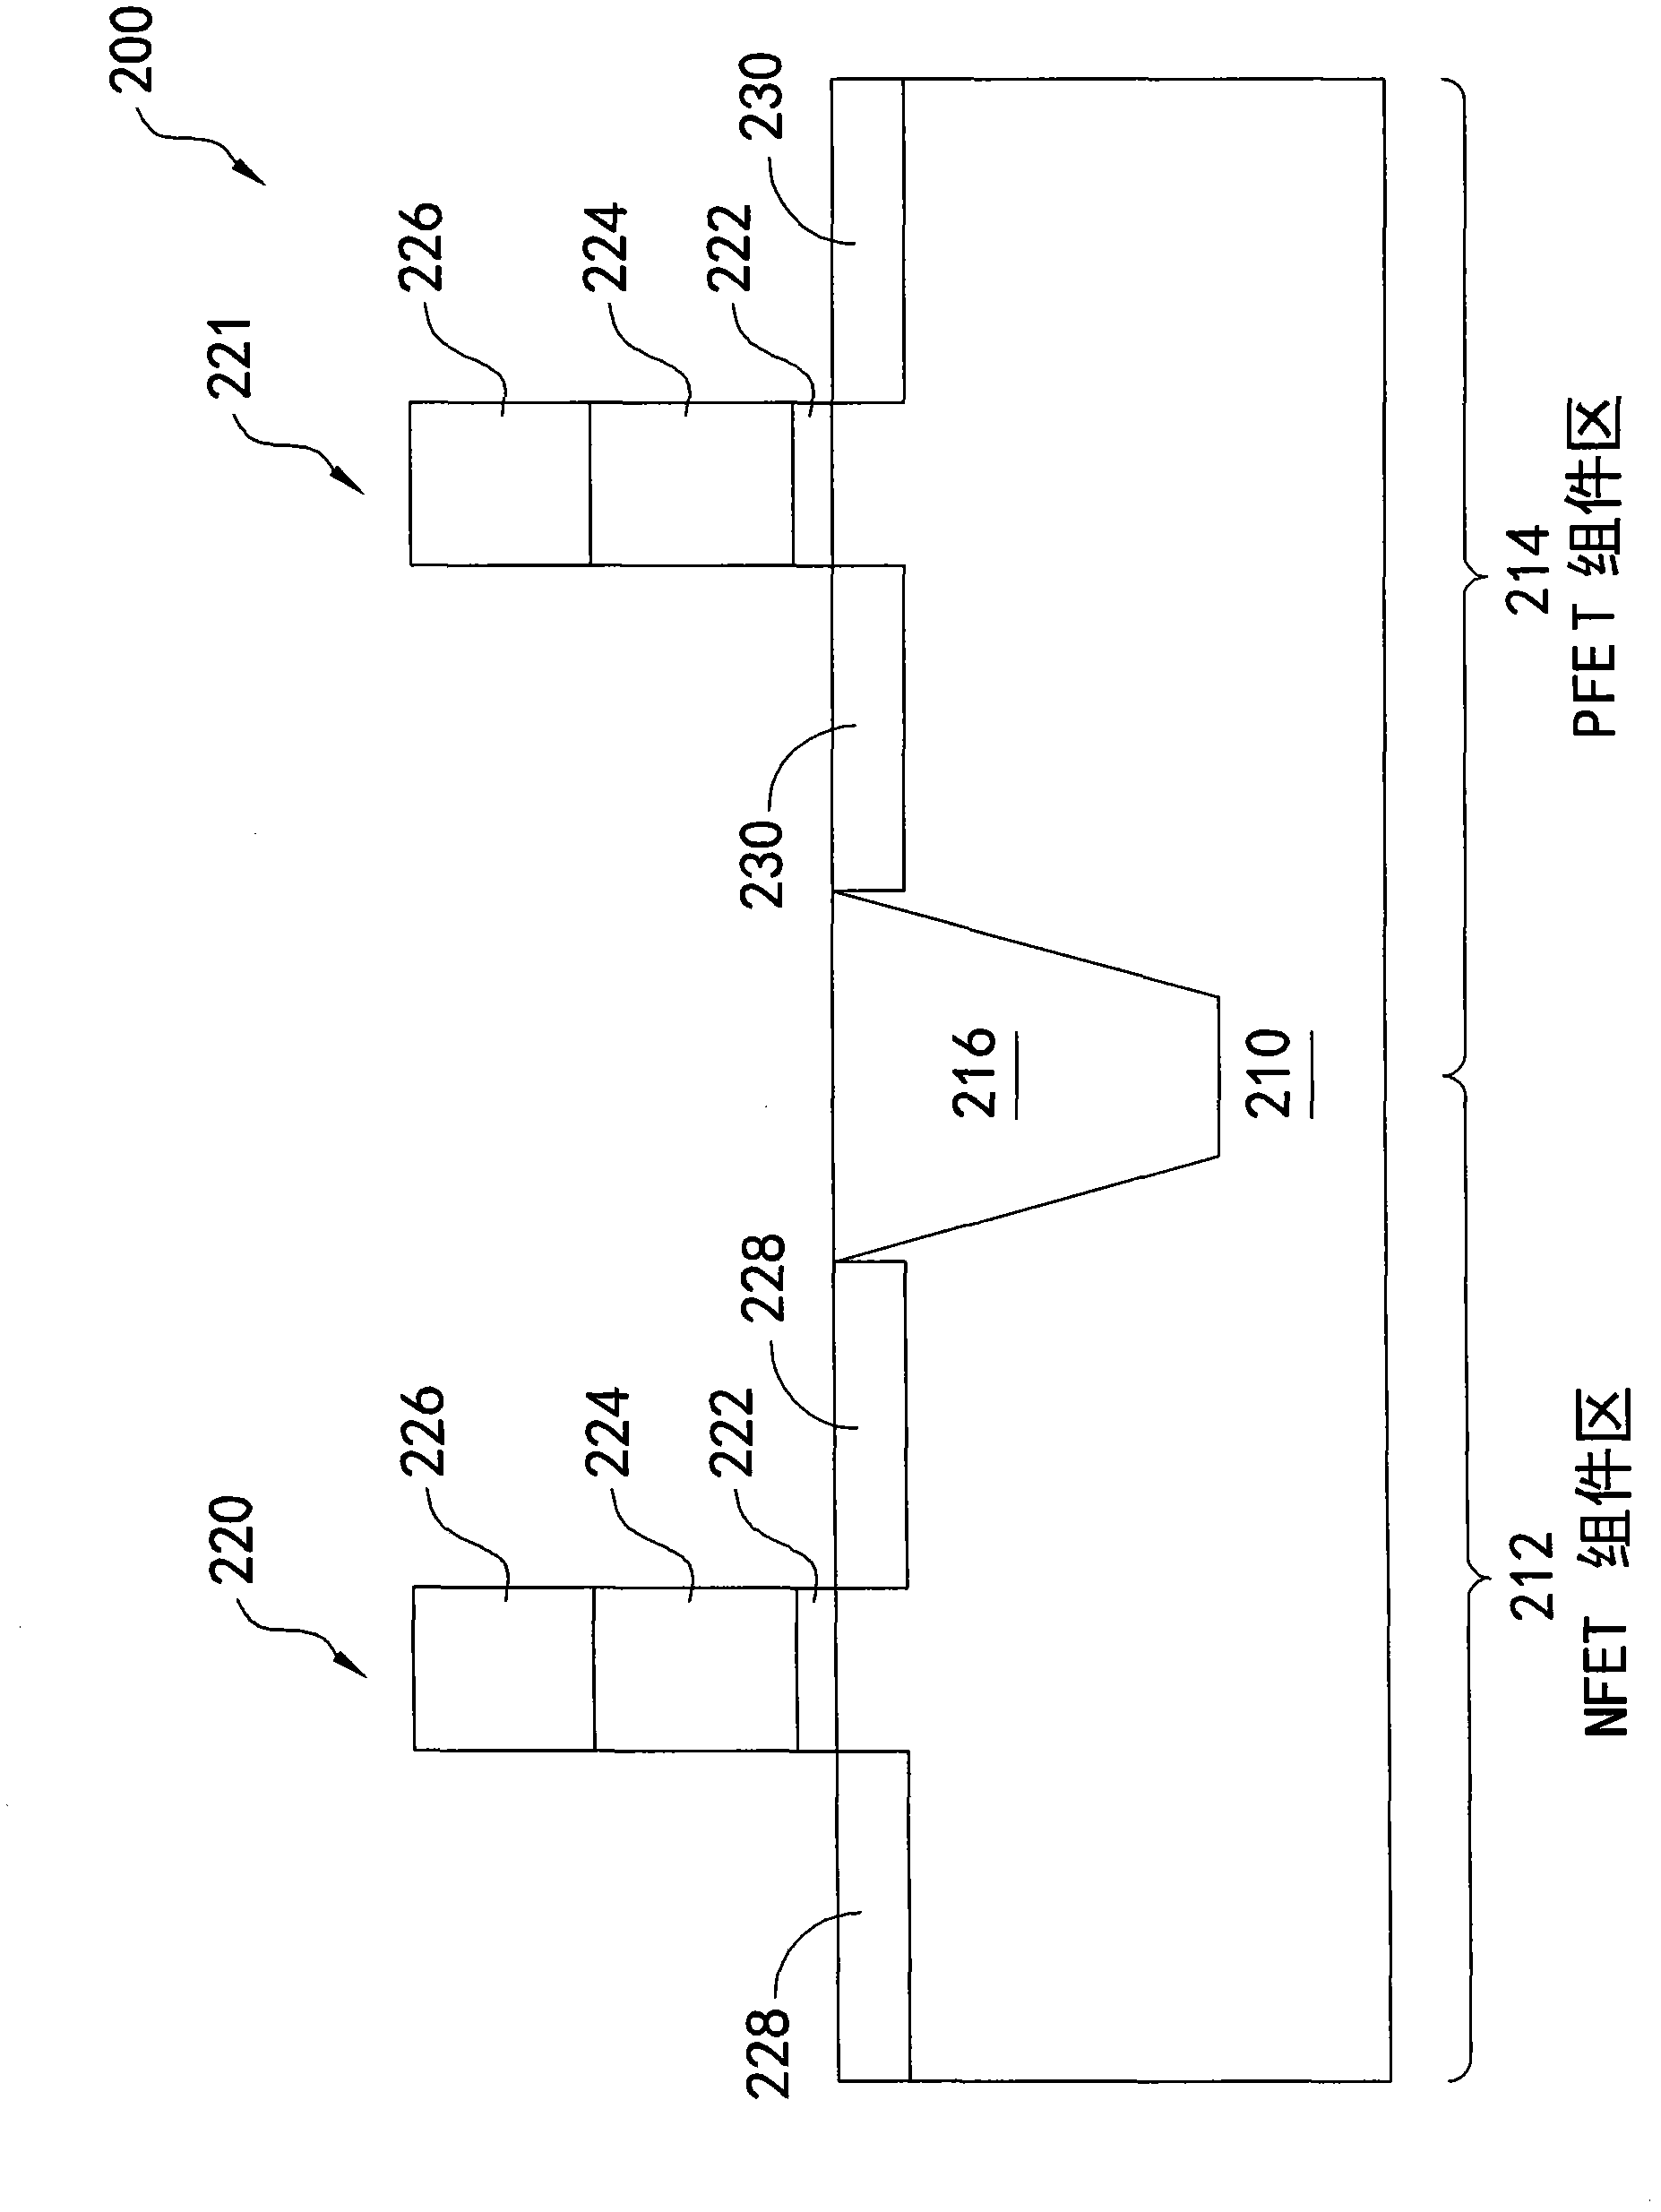 Integrated circuit device and method of manufacturing same